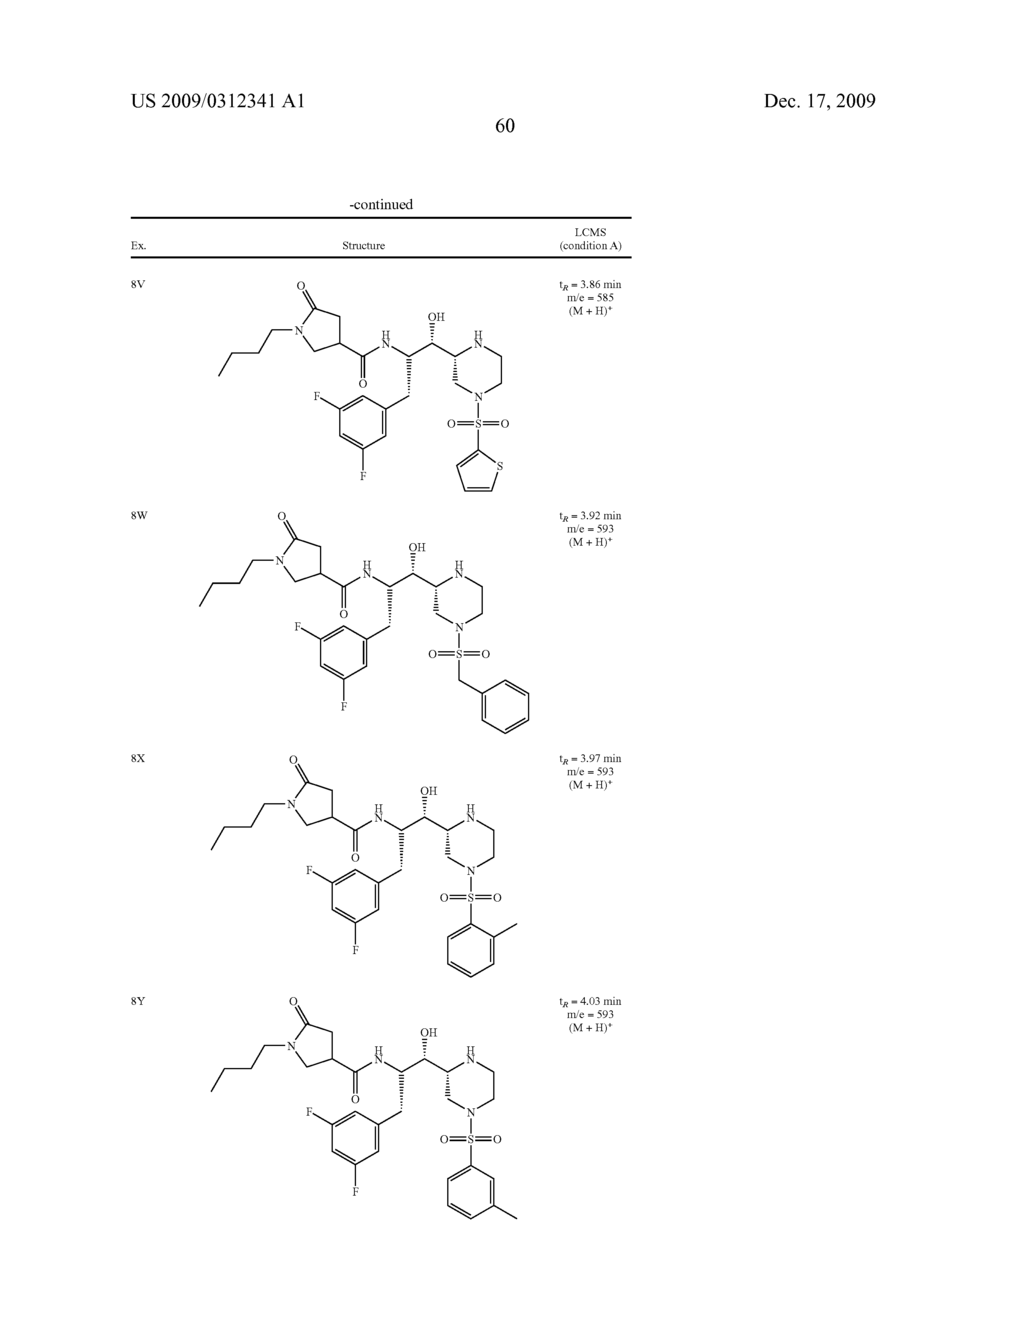 CYCLIC AMINE BACE-1 INHIBITORS HAVING A HETEROCYCLIC SUBSTITUENT - diagram, schematic, and image 61